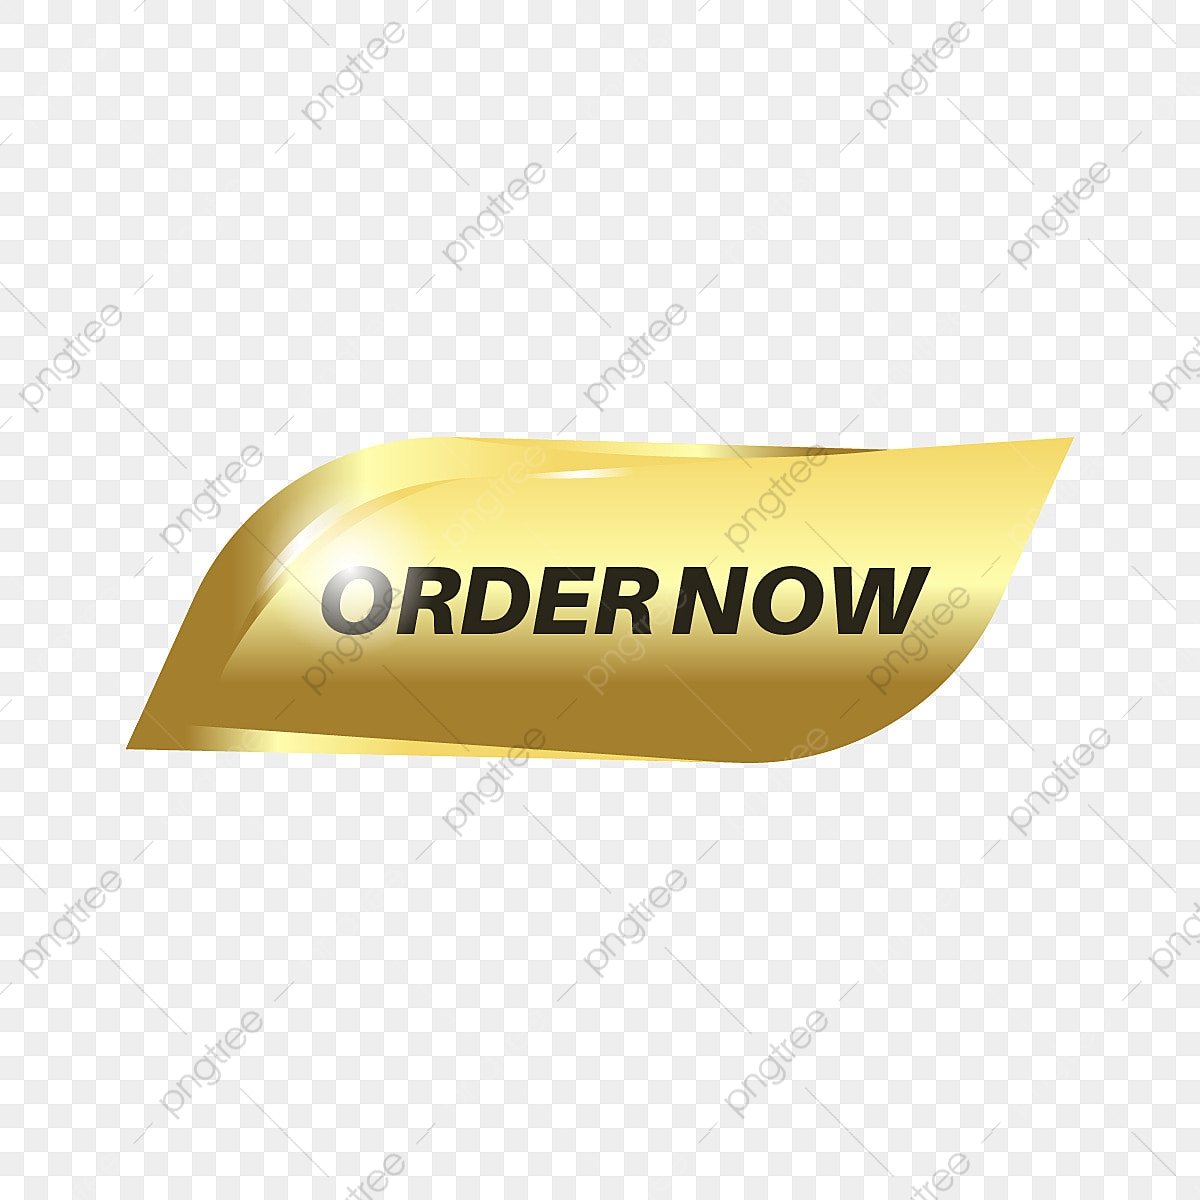 pngtree-gold-order-now-button-png-image_7284875.png